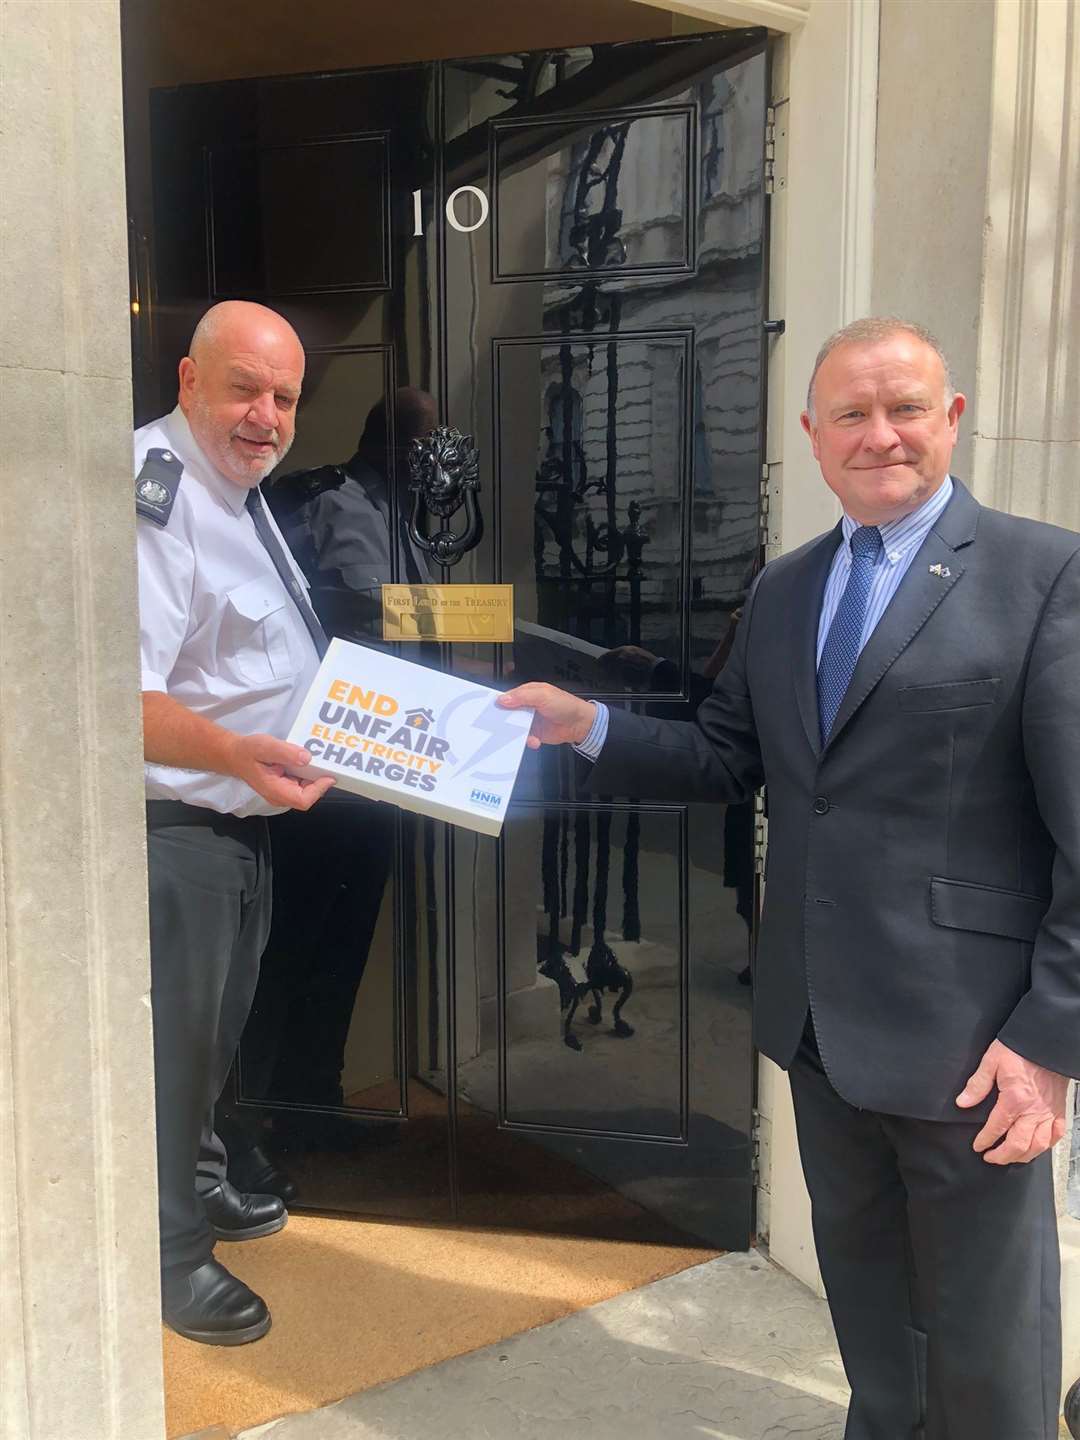 Inverness MP Drew Hendry delivers the Courier's petition calling for an end to higher electrity charges to 10 Downing Street.